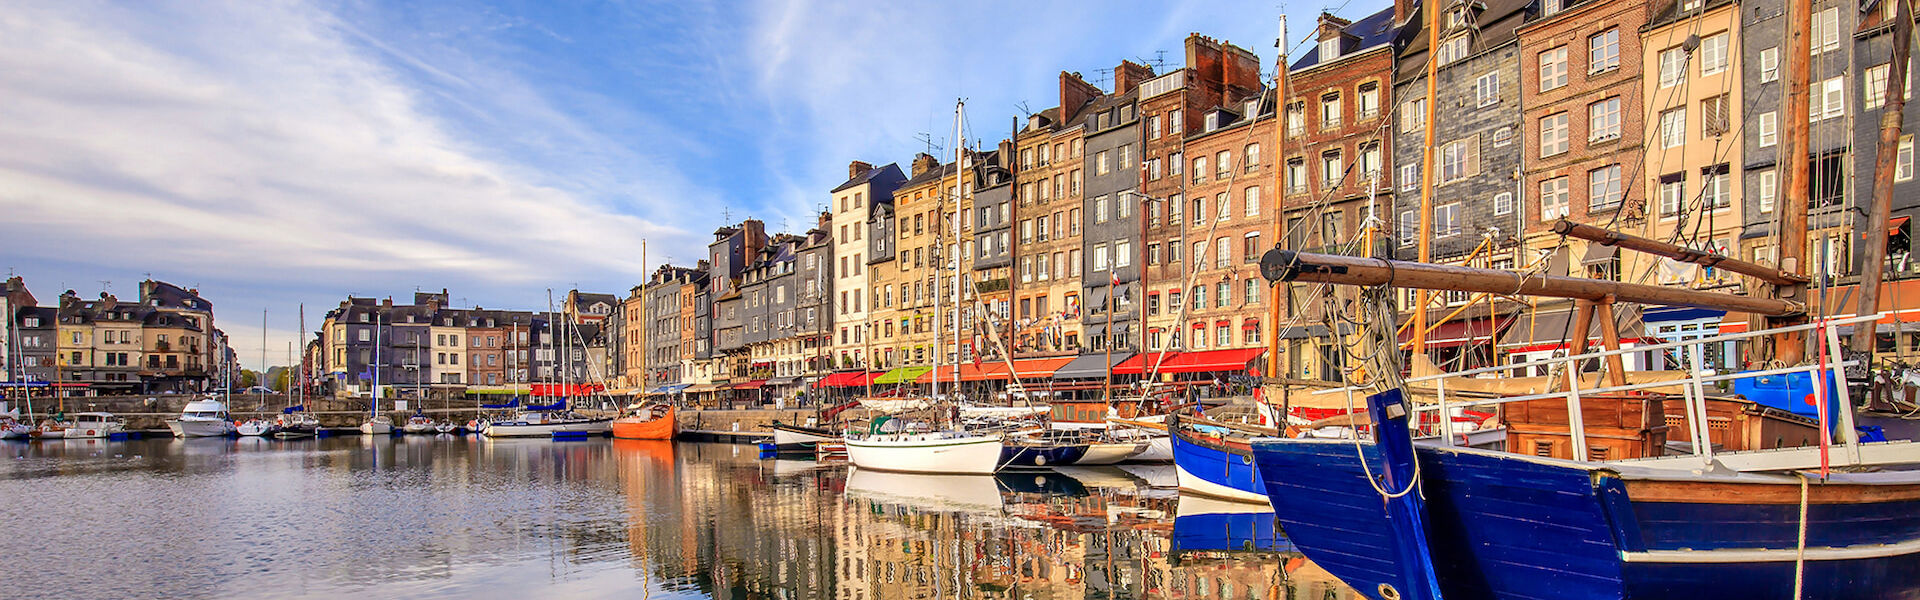 Honfleur's harbor with colorful boats and stacked buildings